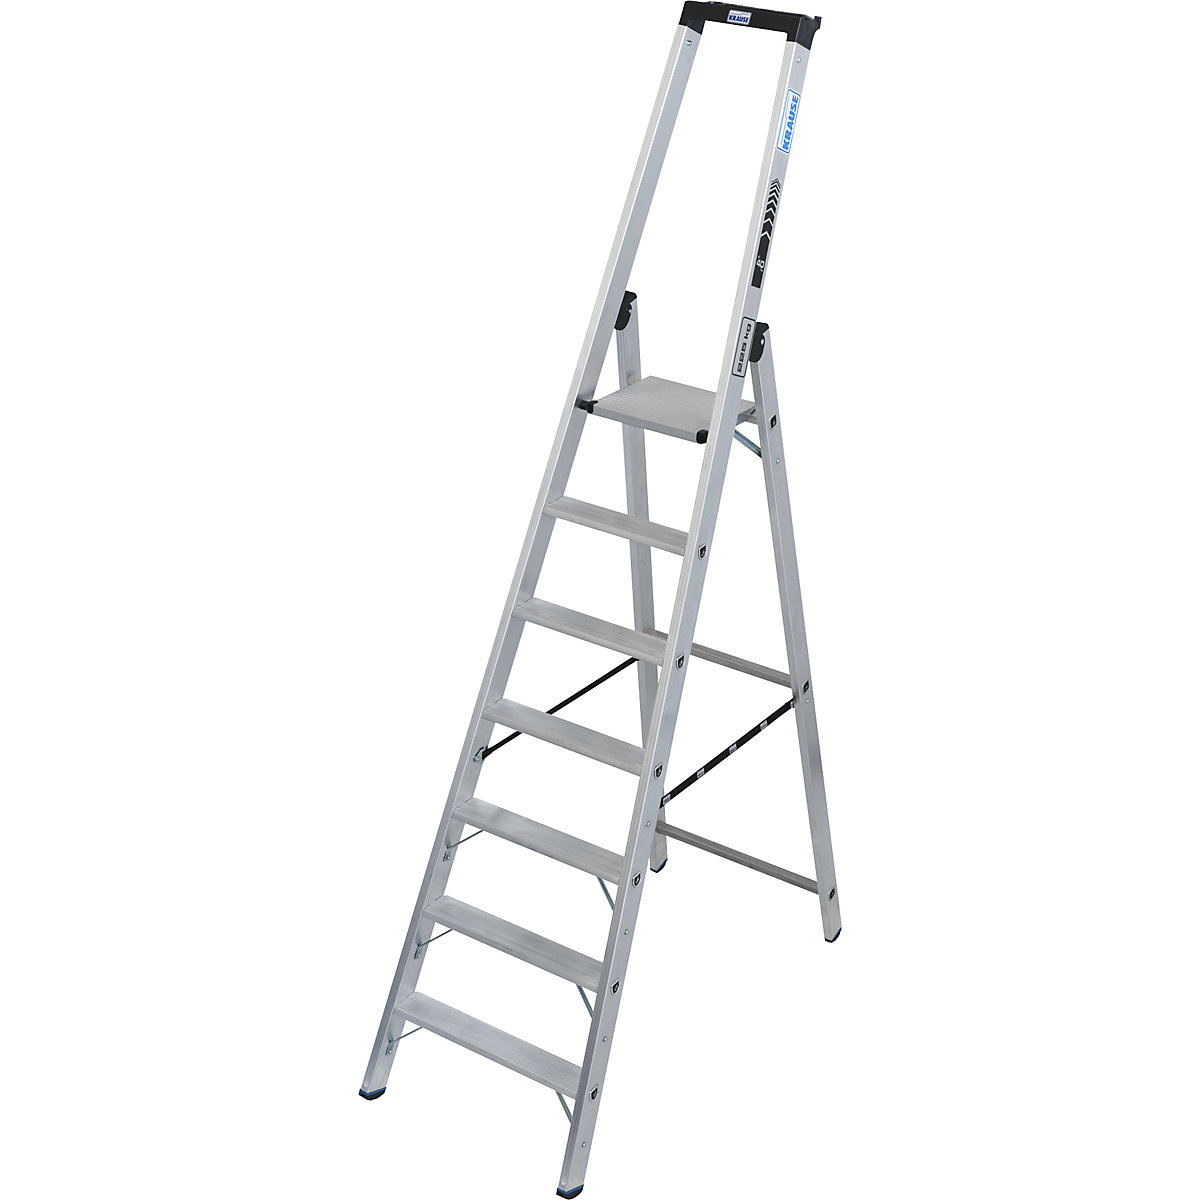 Heavy duty step ladder – KRAUSE, single sided access, up to 225 kg, 7 steps incl. platform-3